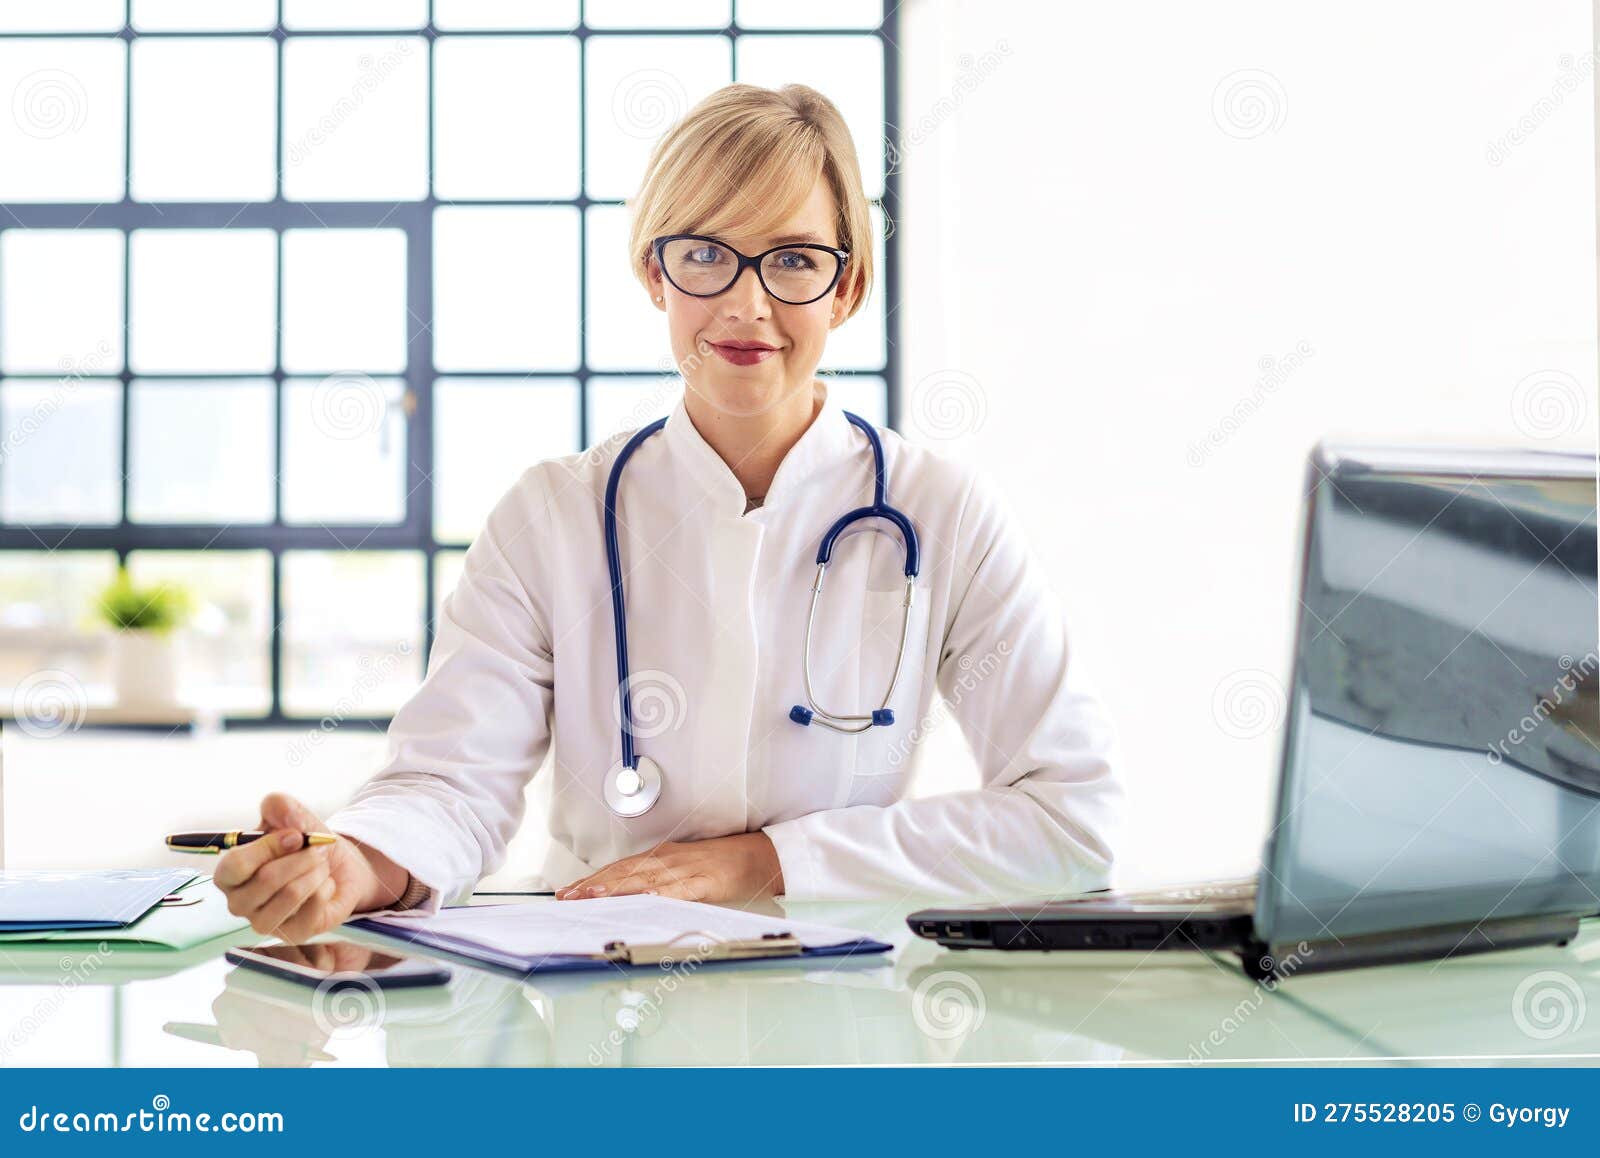 female doctor sitting at desk and using laptop and doing some paperwork in doctorÃ¢â¬â¢s office